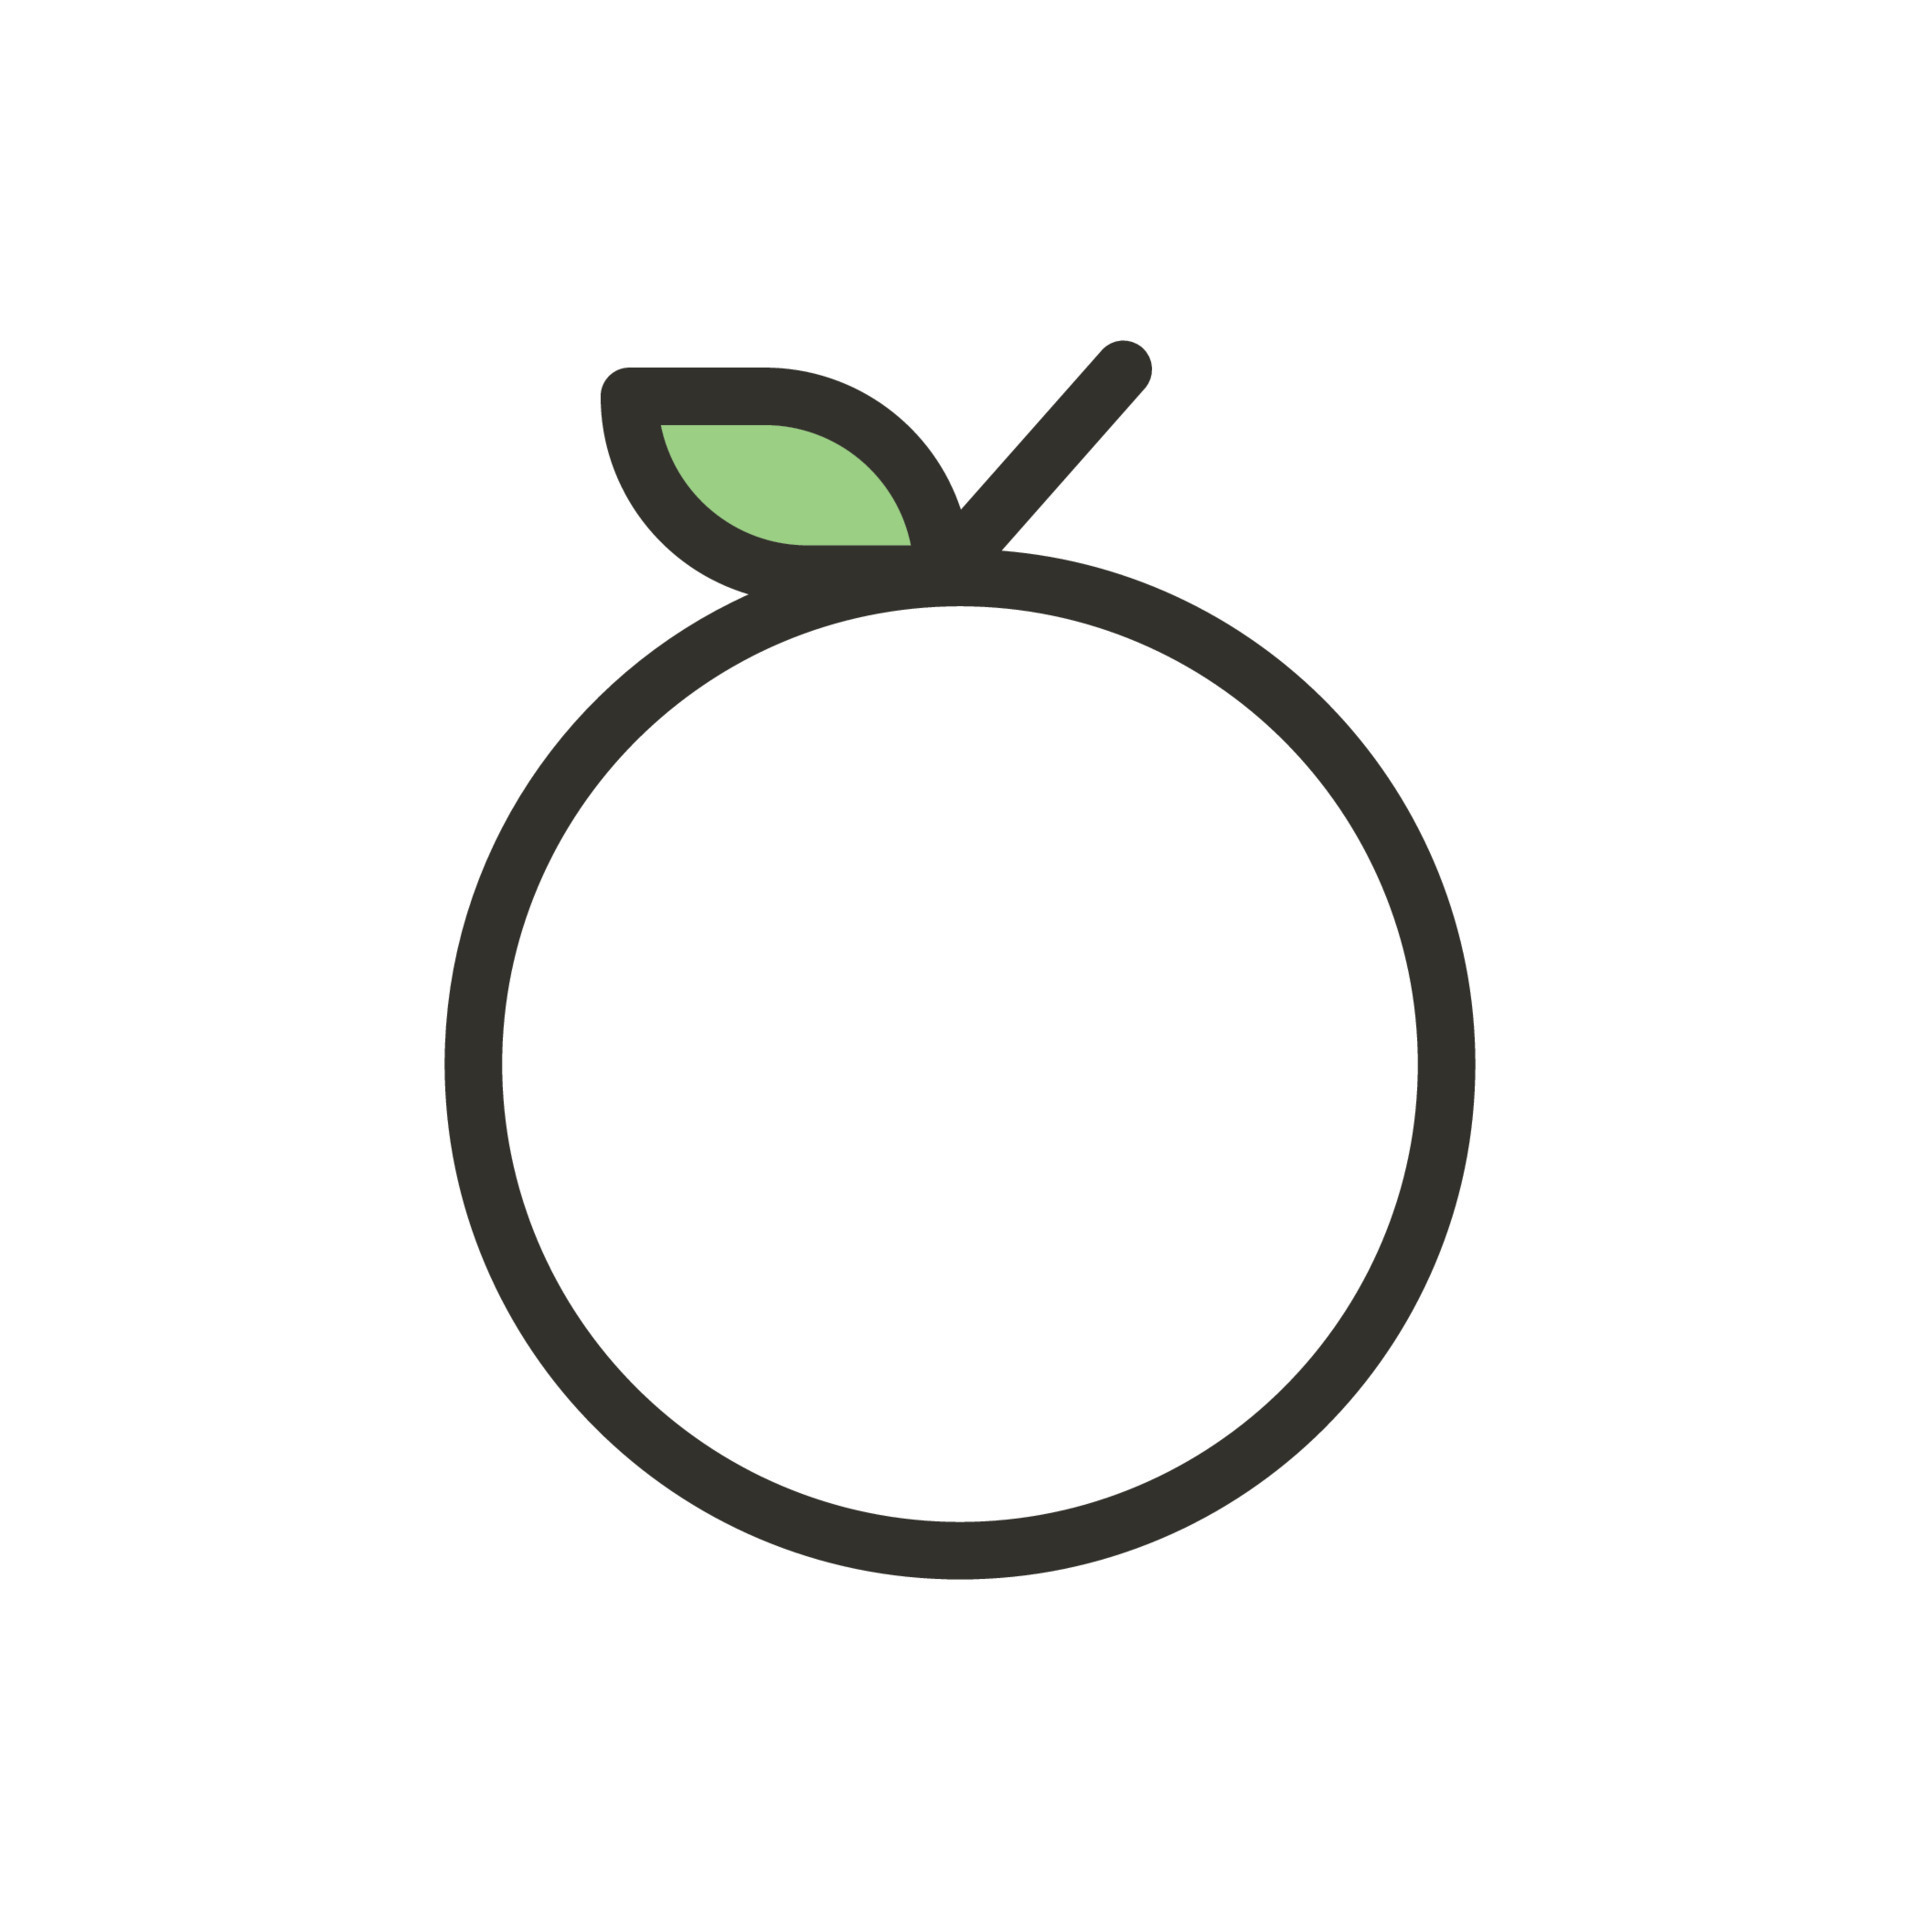 Peach Vector Art, Icons, and Graphics for Free Download